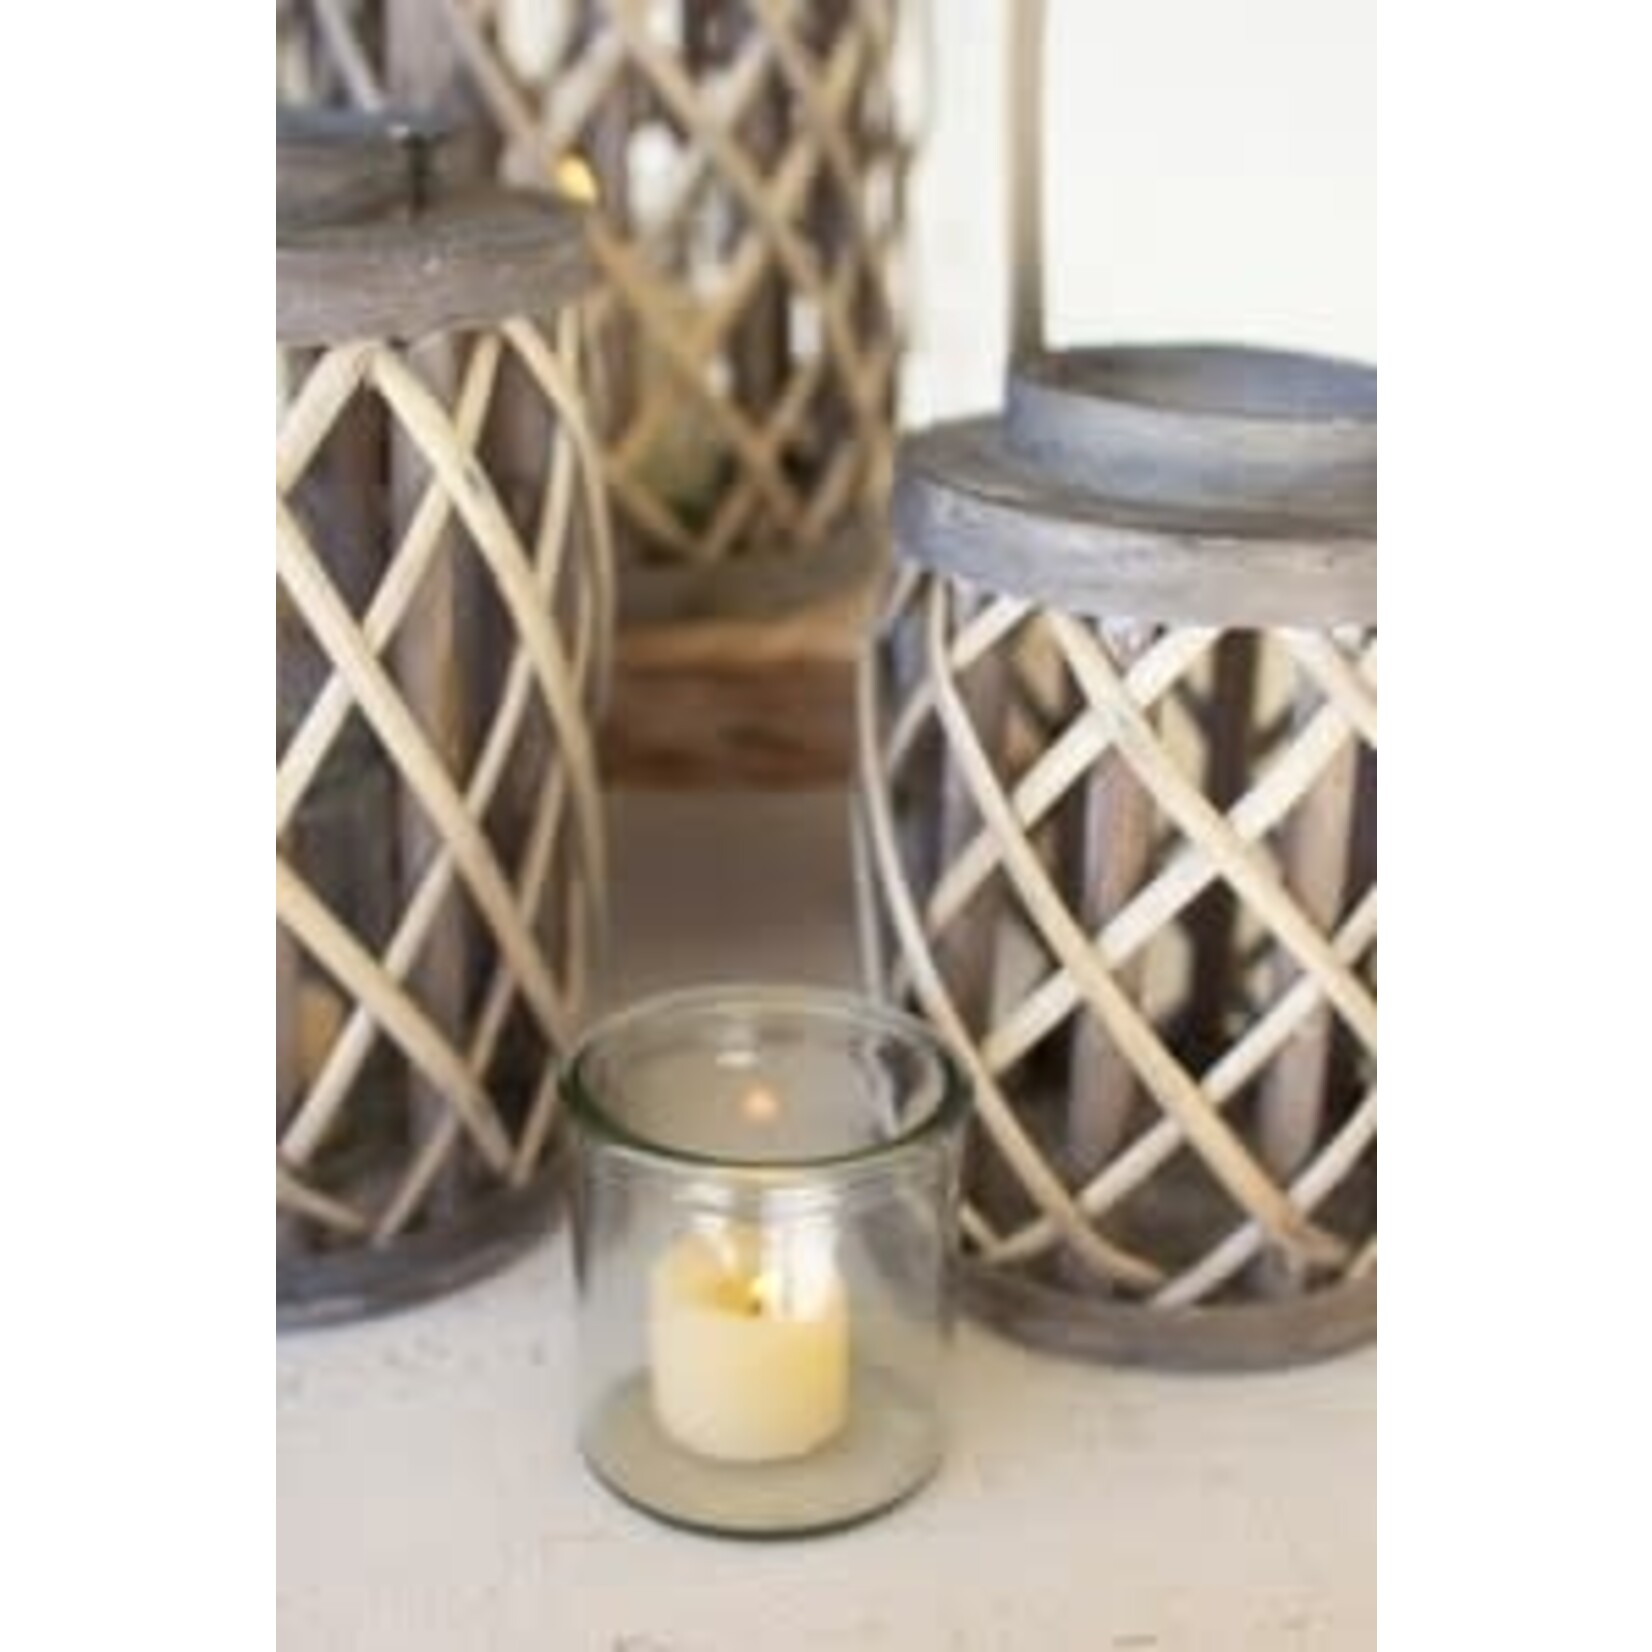 Grey Willow Cylinder Lantern with Glass Insert  XSmall